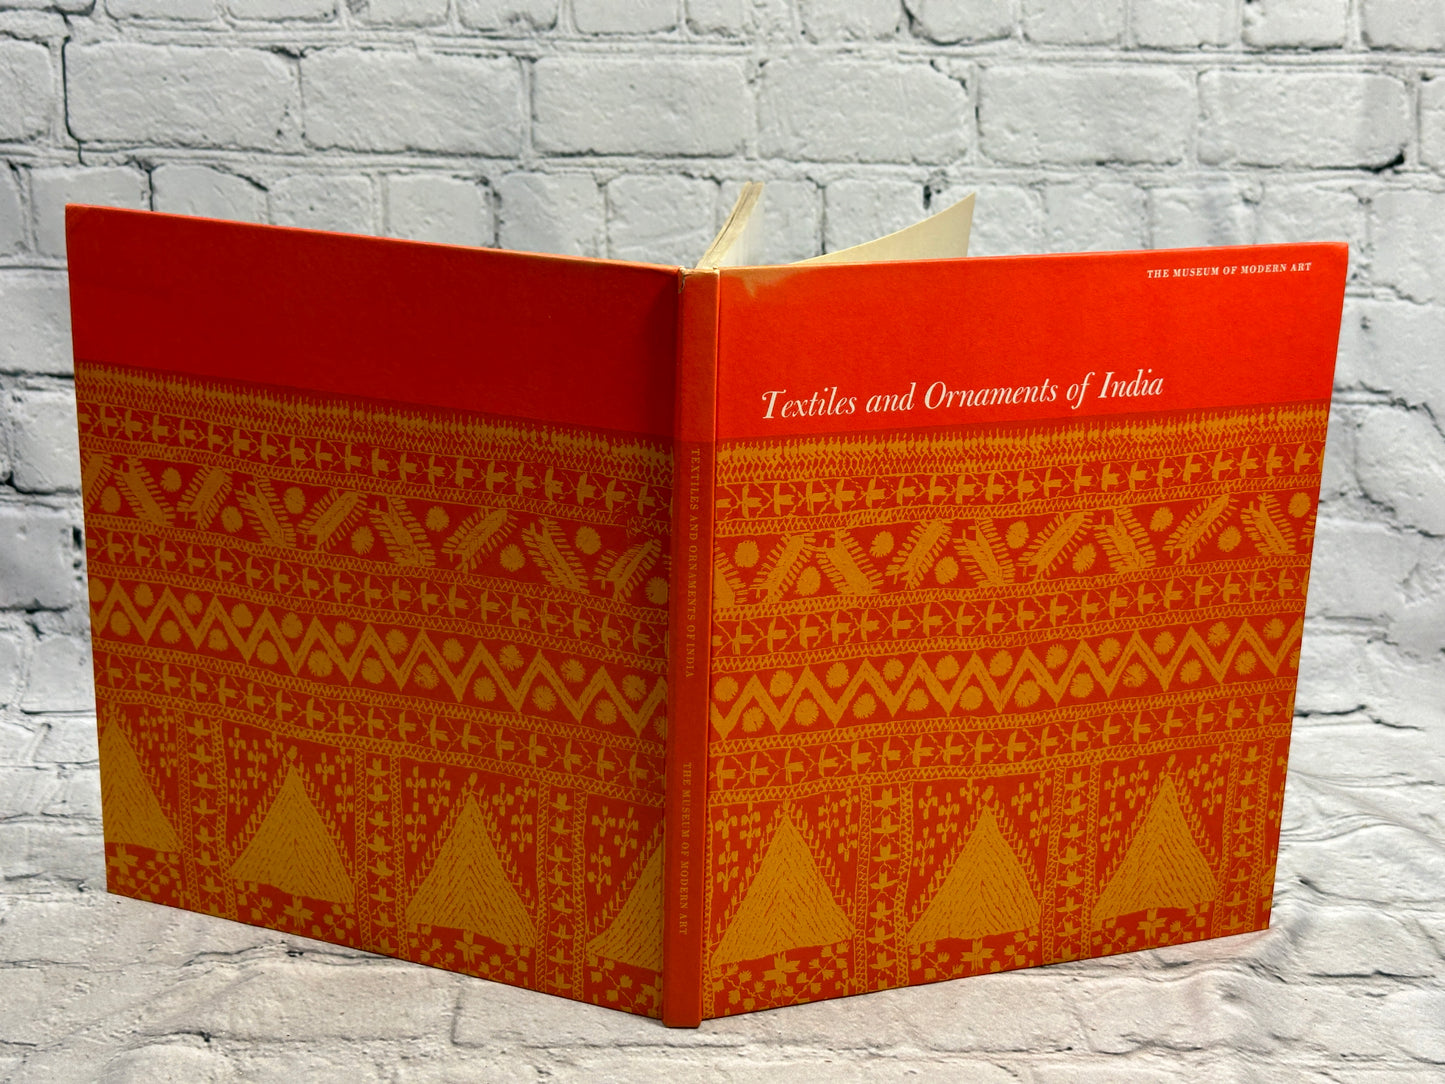 Textiles and Ornaments of India by Pupul Jayakar [1956]